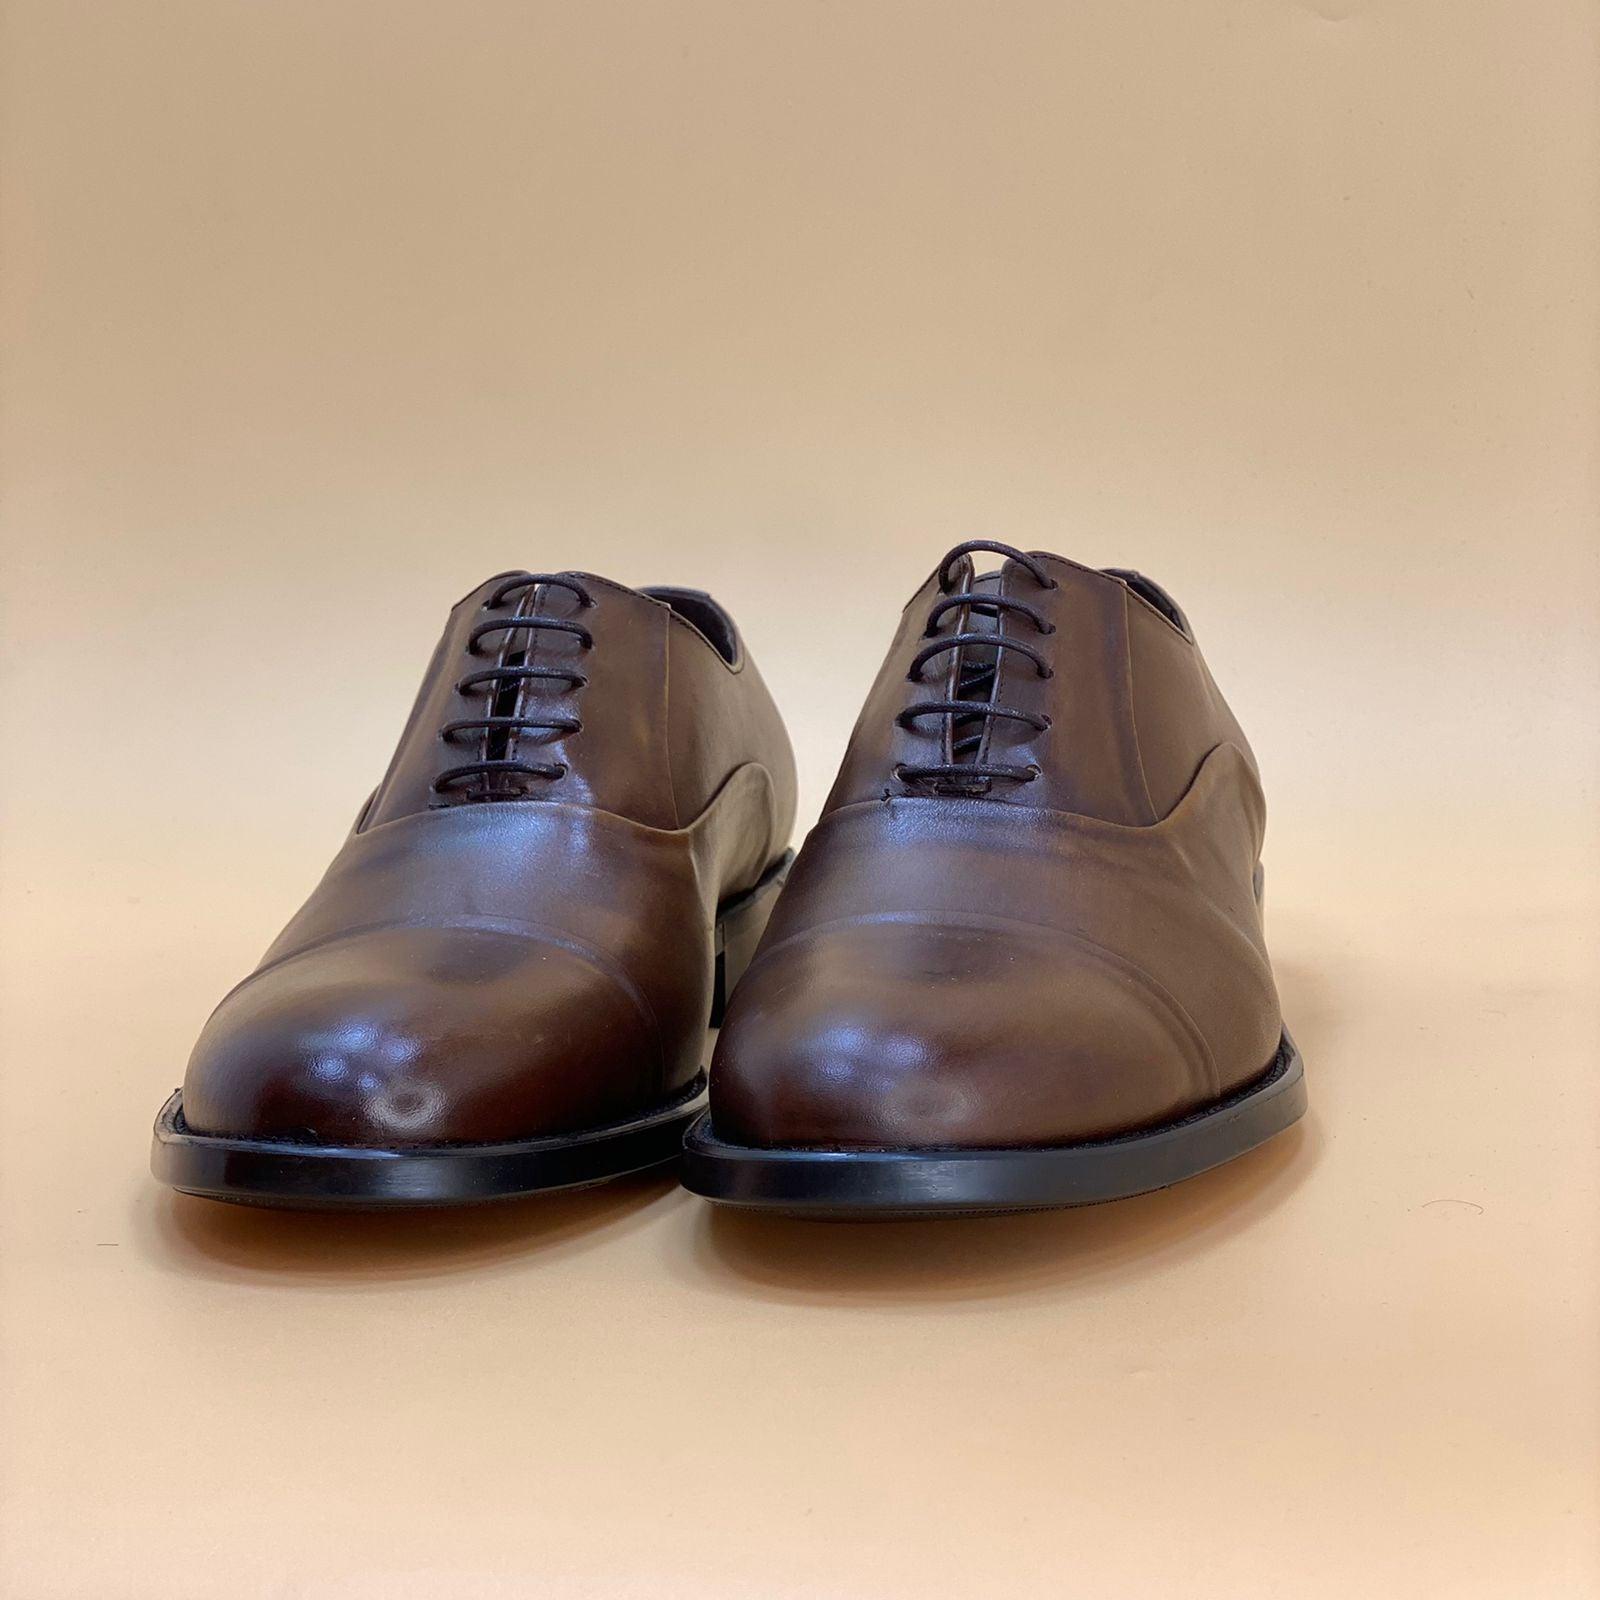 MADE IN TURKEY GENUINE LEATHER MEN SHOES M146 - Olive Tree Shoes 